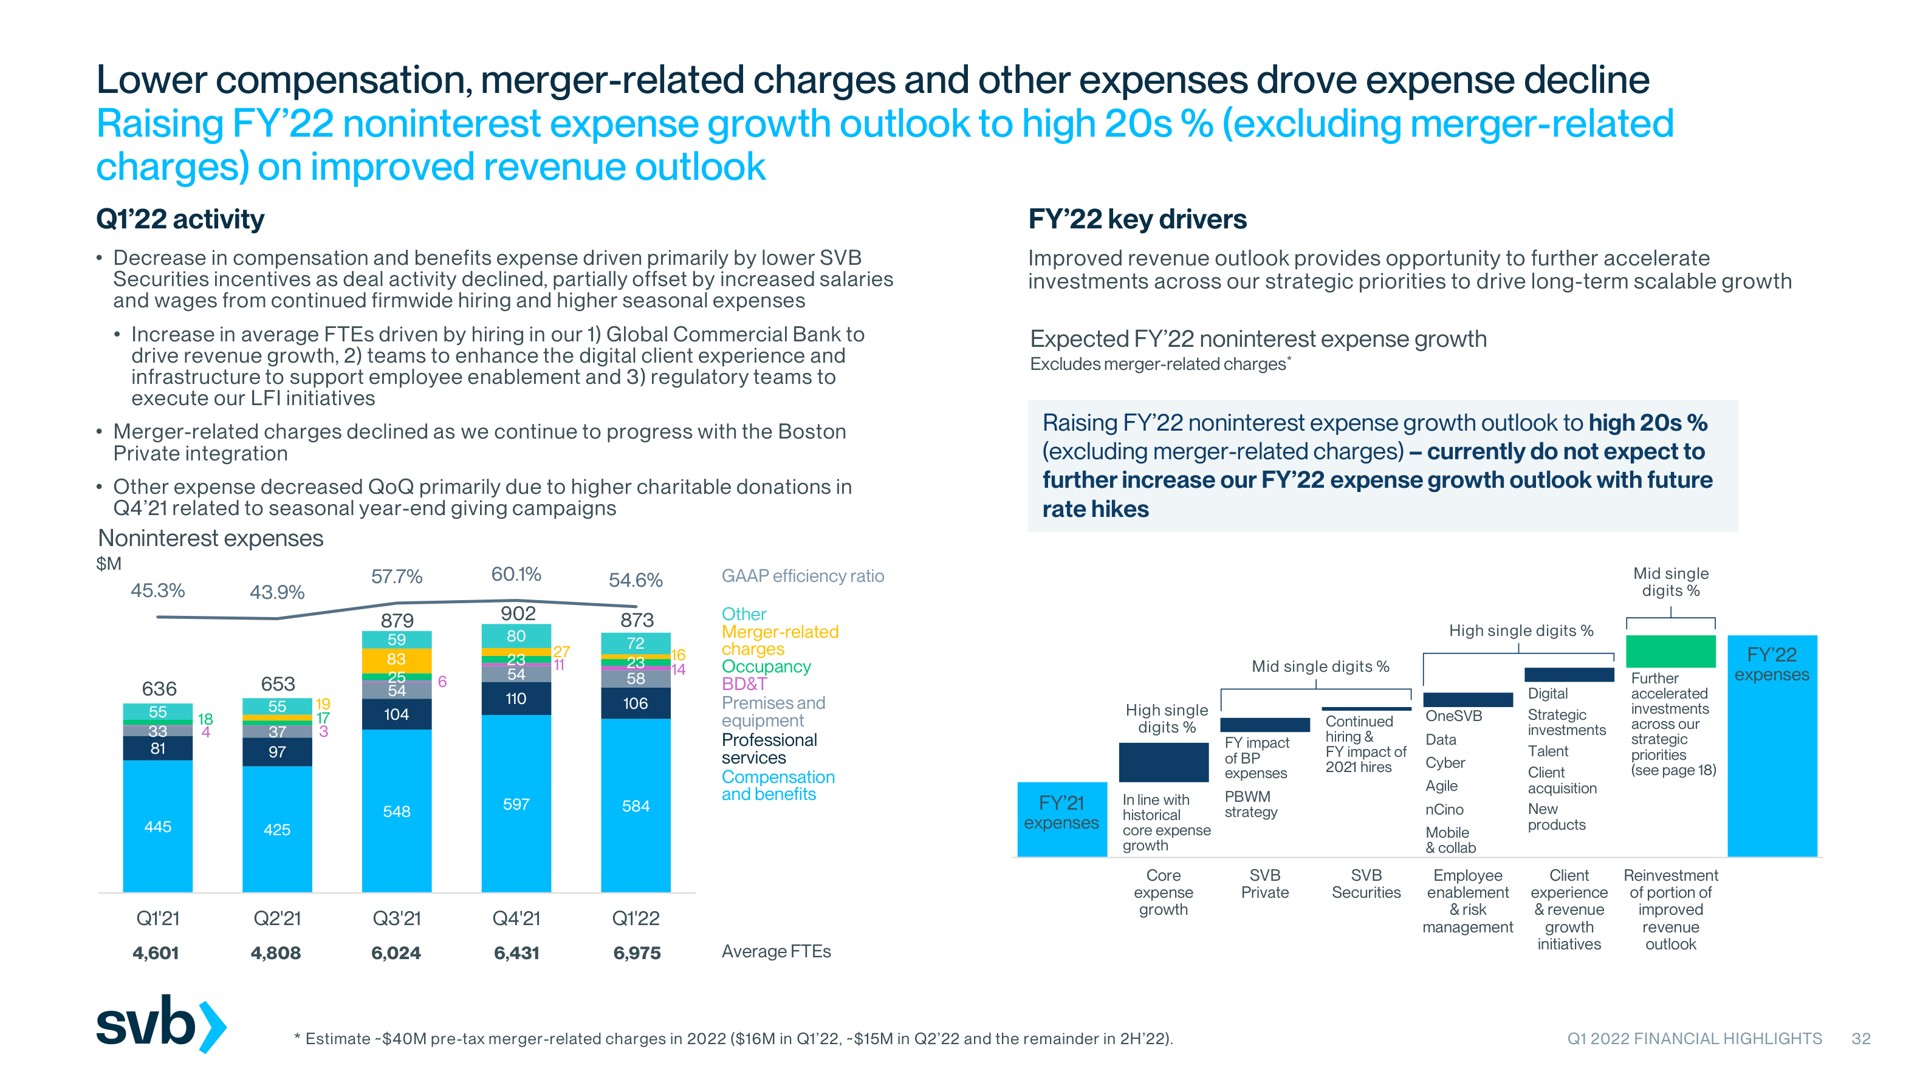 lower compensation merger related charges and other expenses drove expense decline raising expense growth outlook to high excluding merger related charges on improved revenue outlook | Silicon Valley Bank